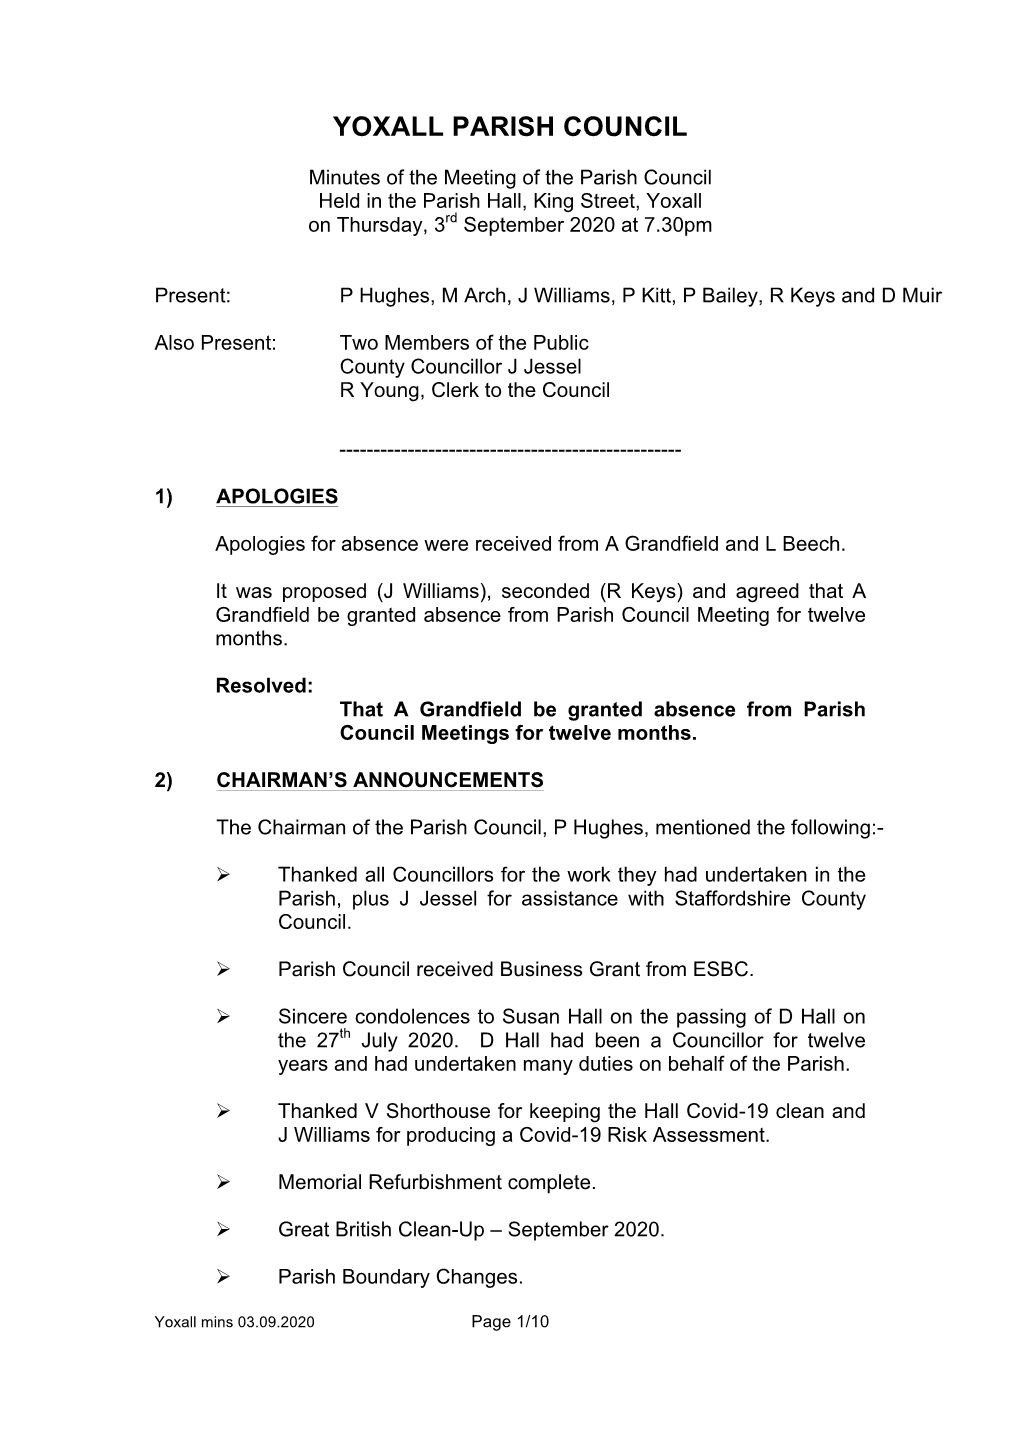 Minutes of the Meeting of the Parish Council Held in the Parish Hall, King Street, Yoxall on Thursday, 3Rd September 2020 at 7.30Pm